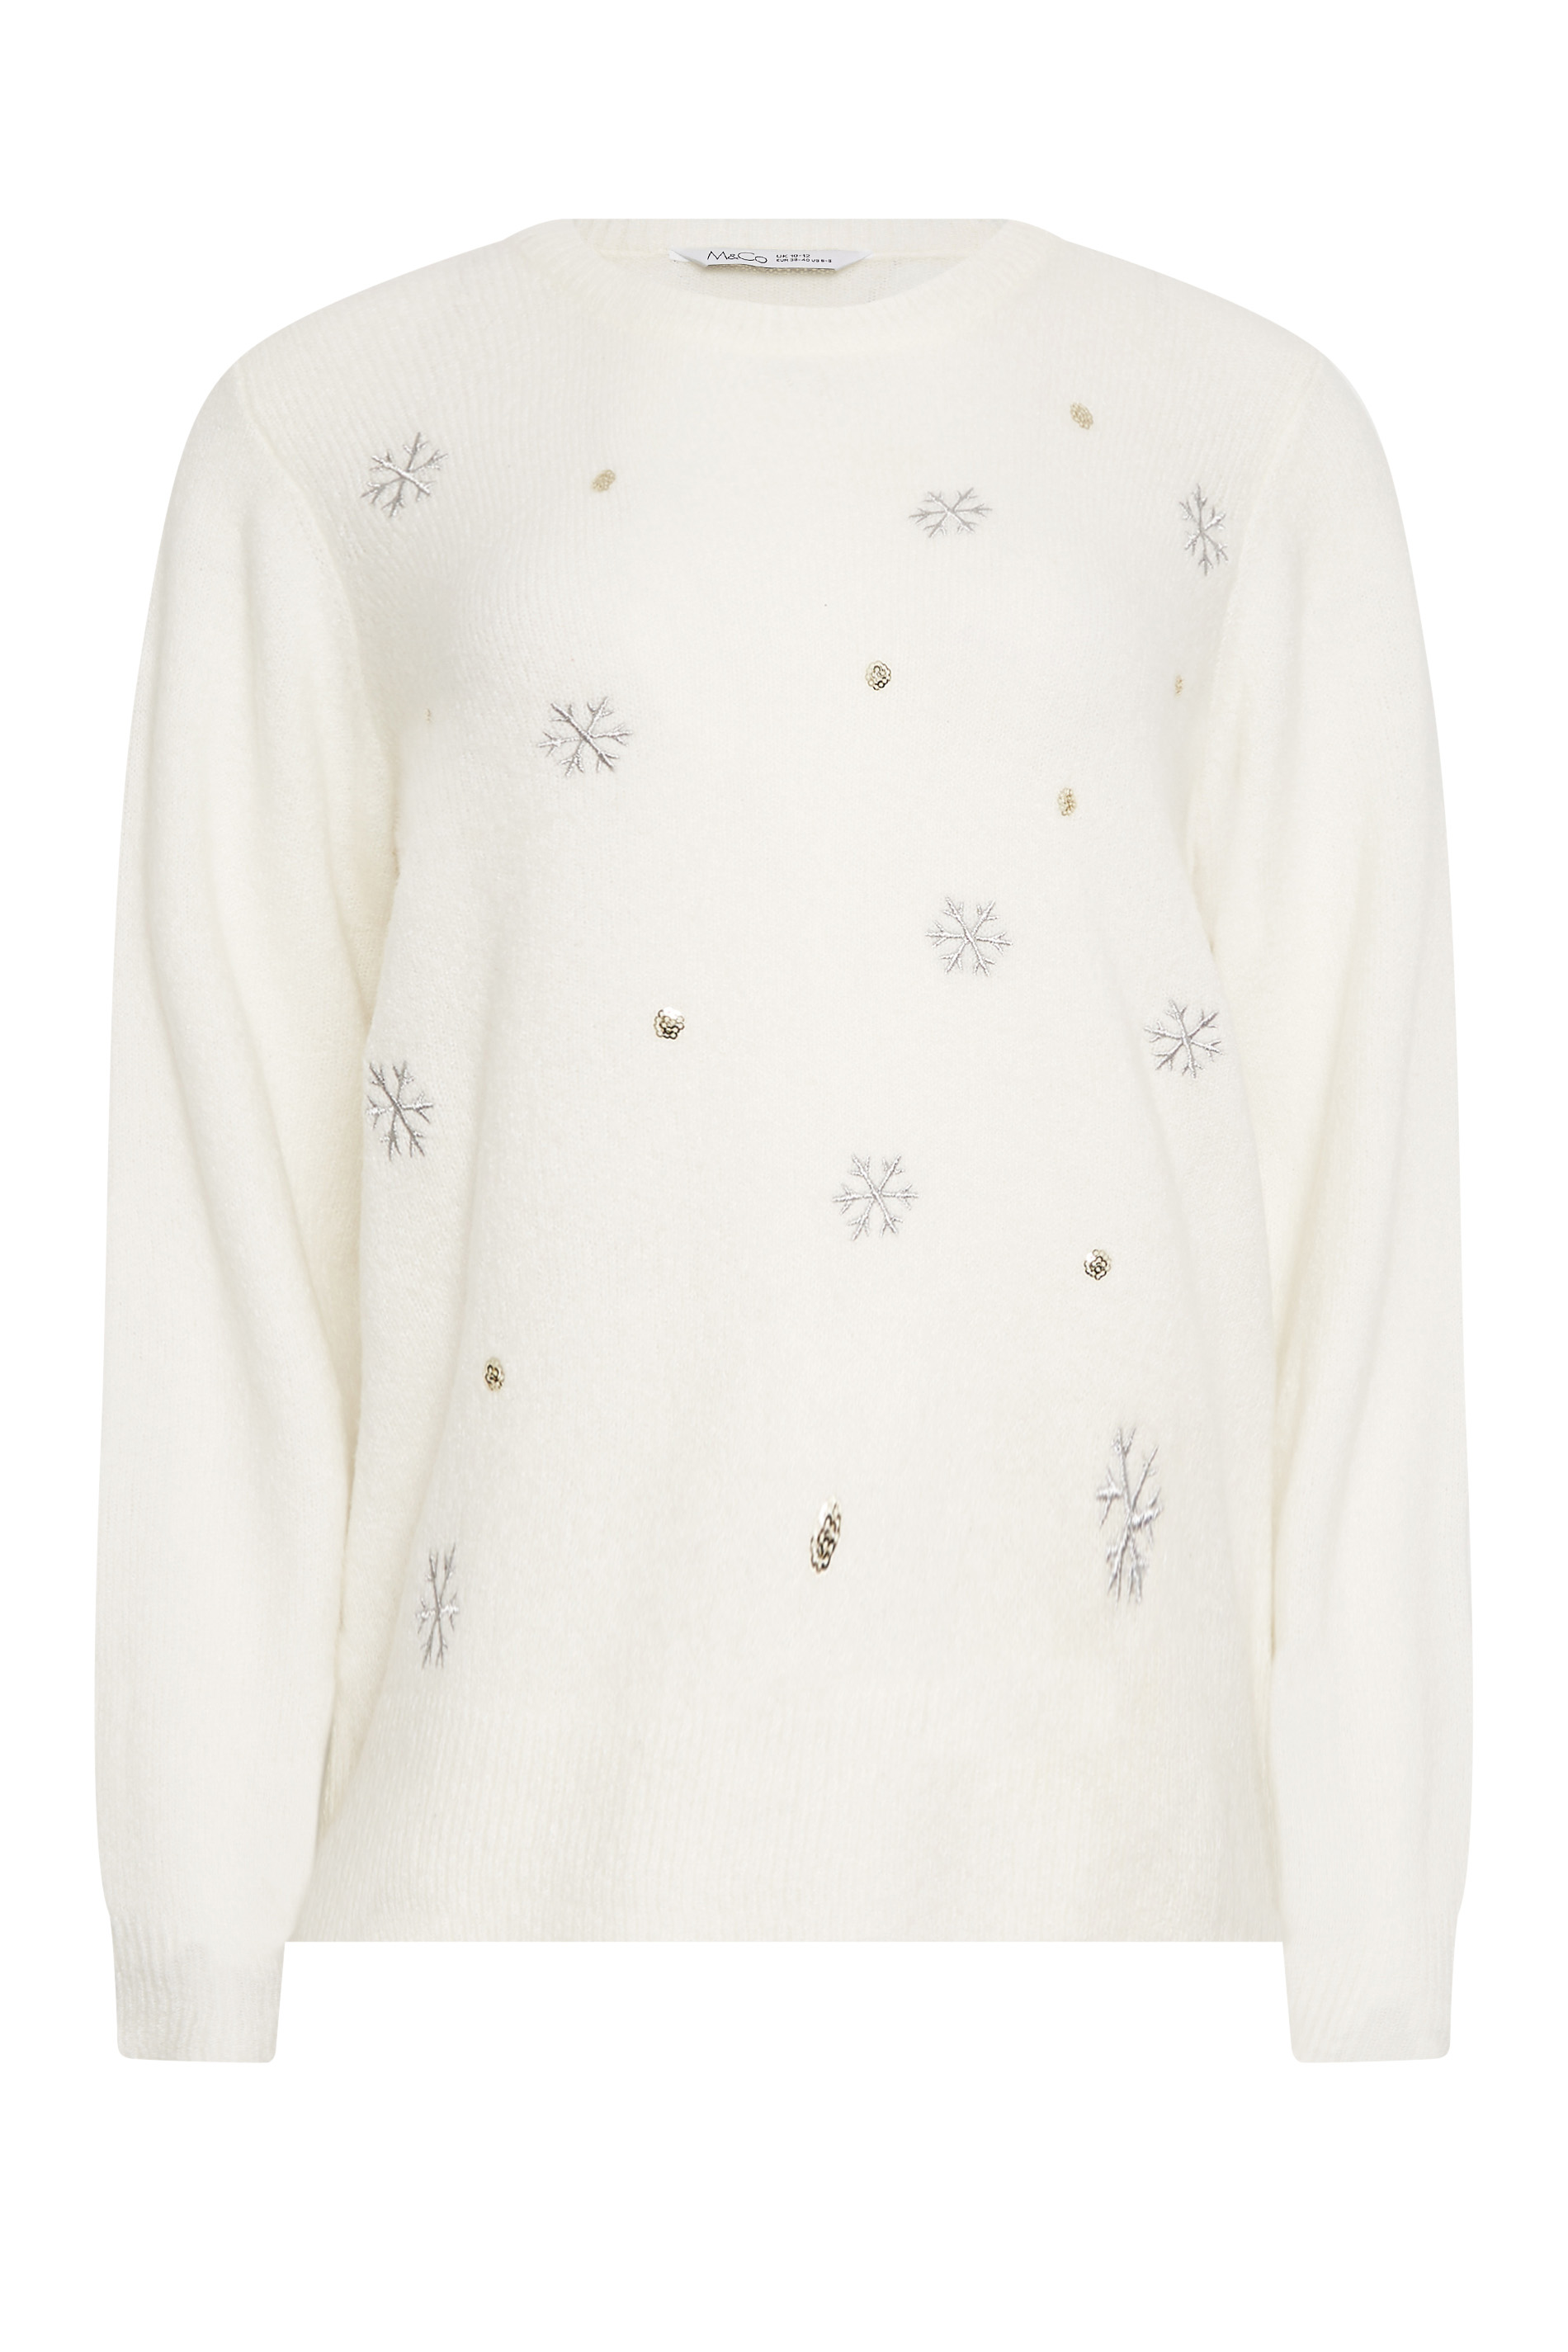 M&Co Petite Ivory White Sequin Snowflake Christmas Jumper | M&Co